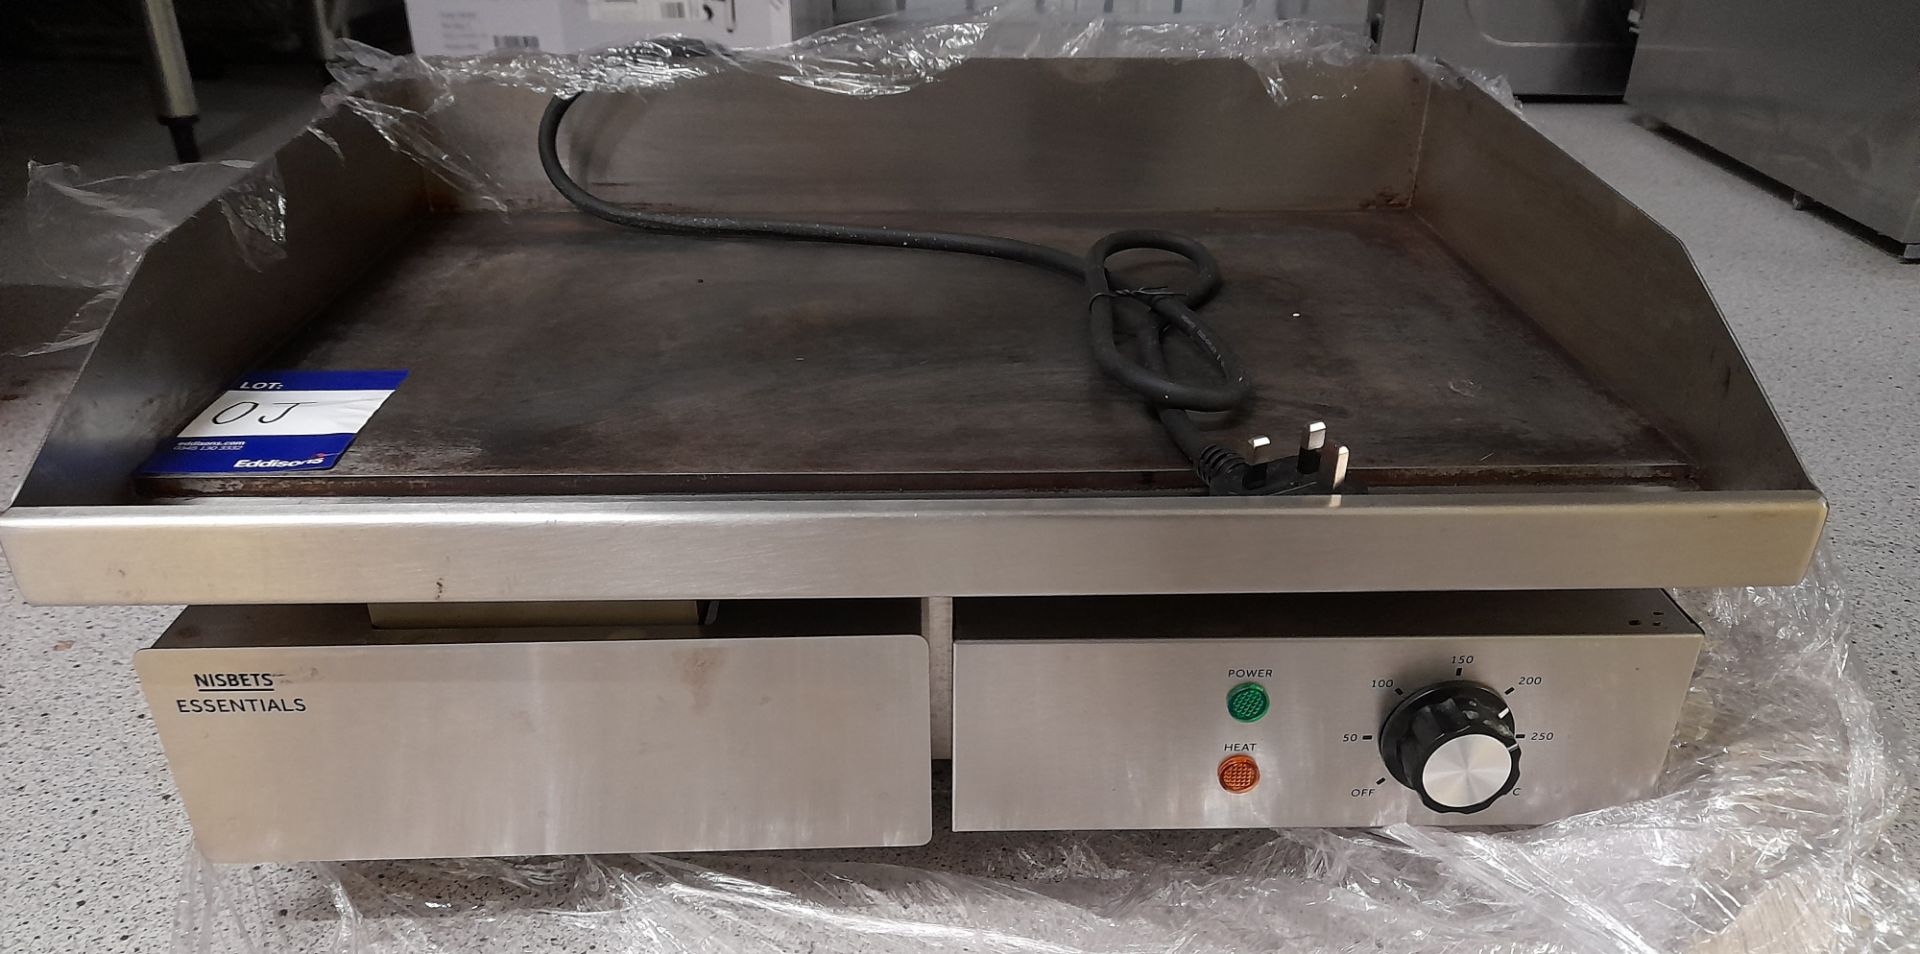 Nisbets Essentials DA397 Counter-top griddle, Serial Number 397202205000709 – Located Manchester - Image 2 of 4